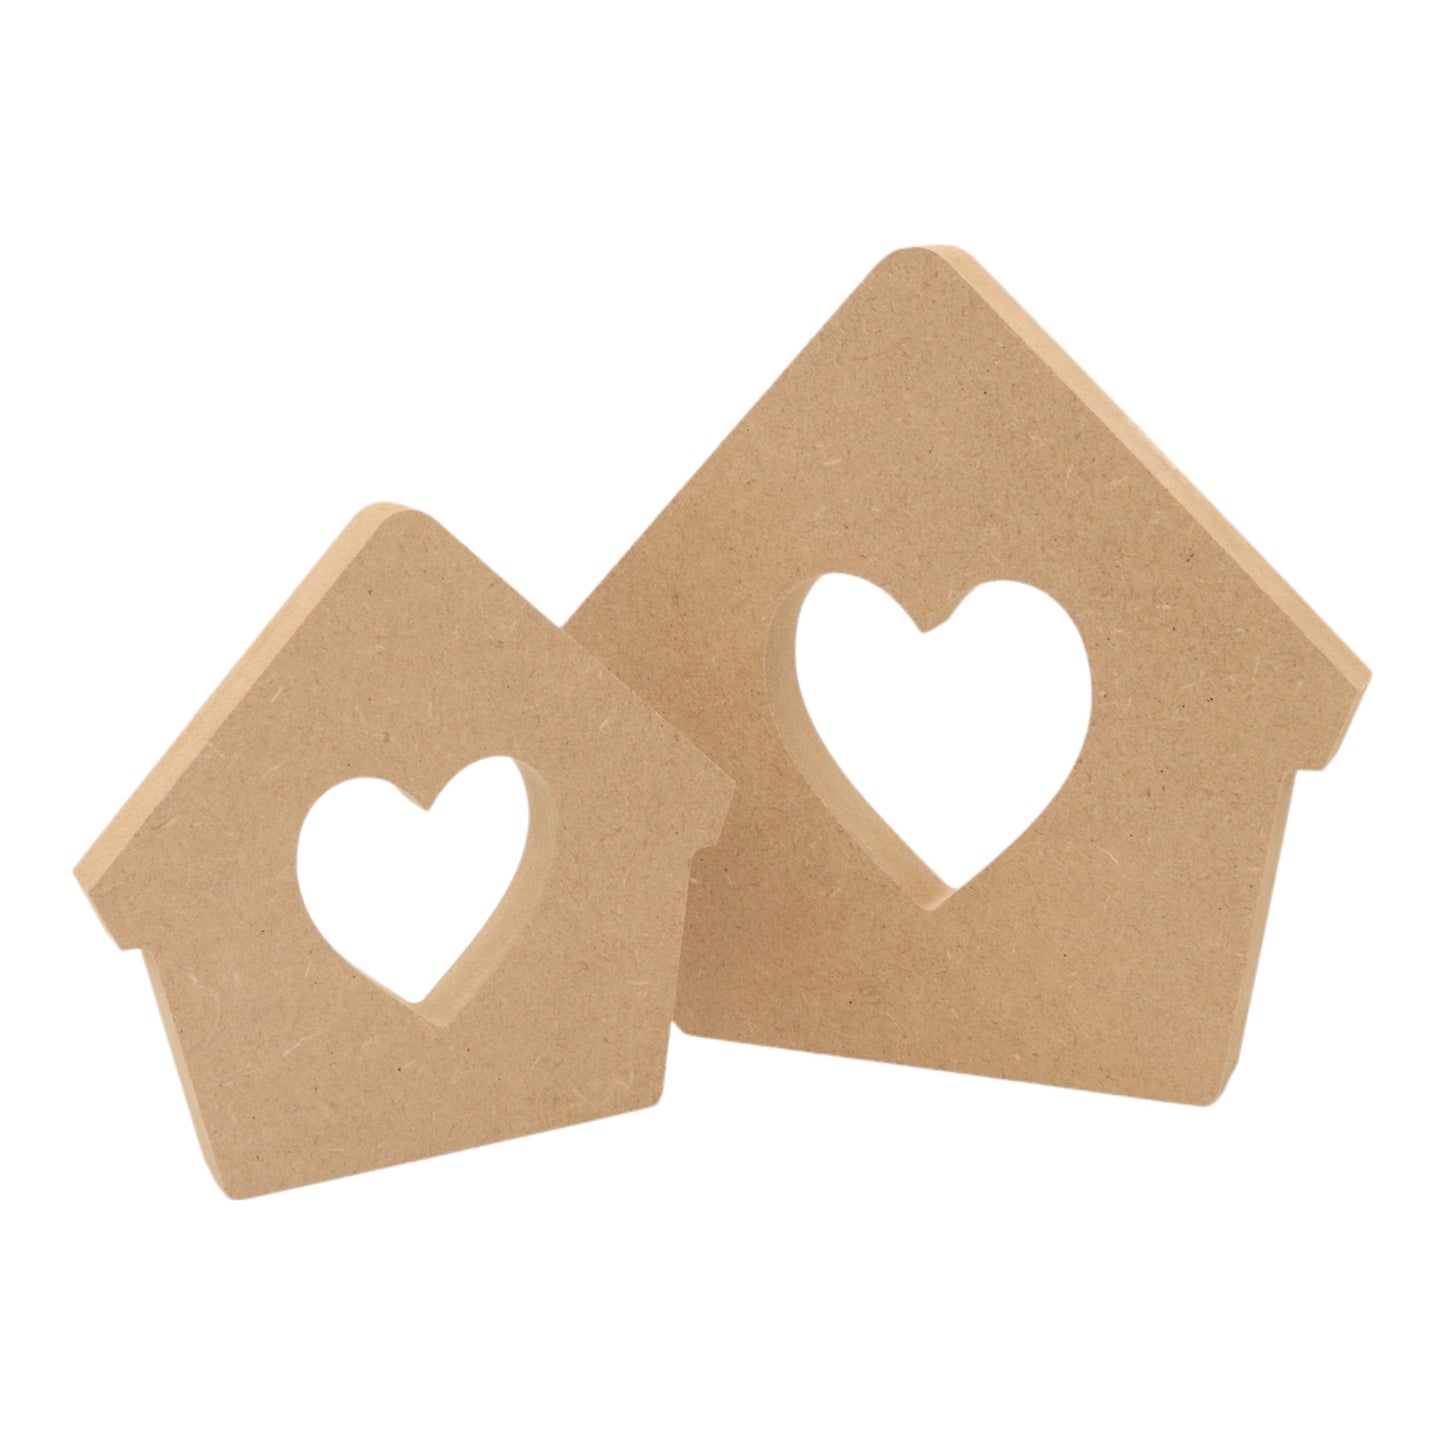 MDF Freestanding Bird House with Heart Cut out Shape